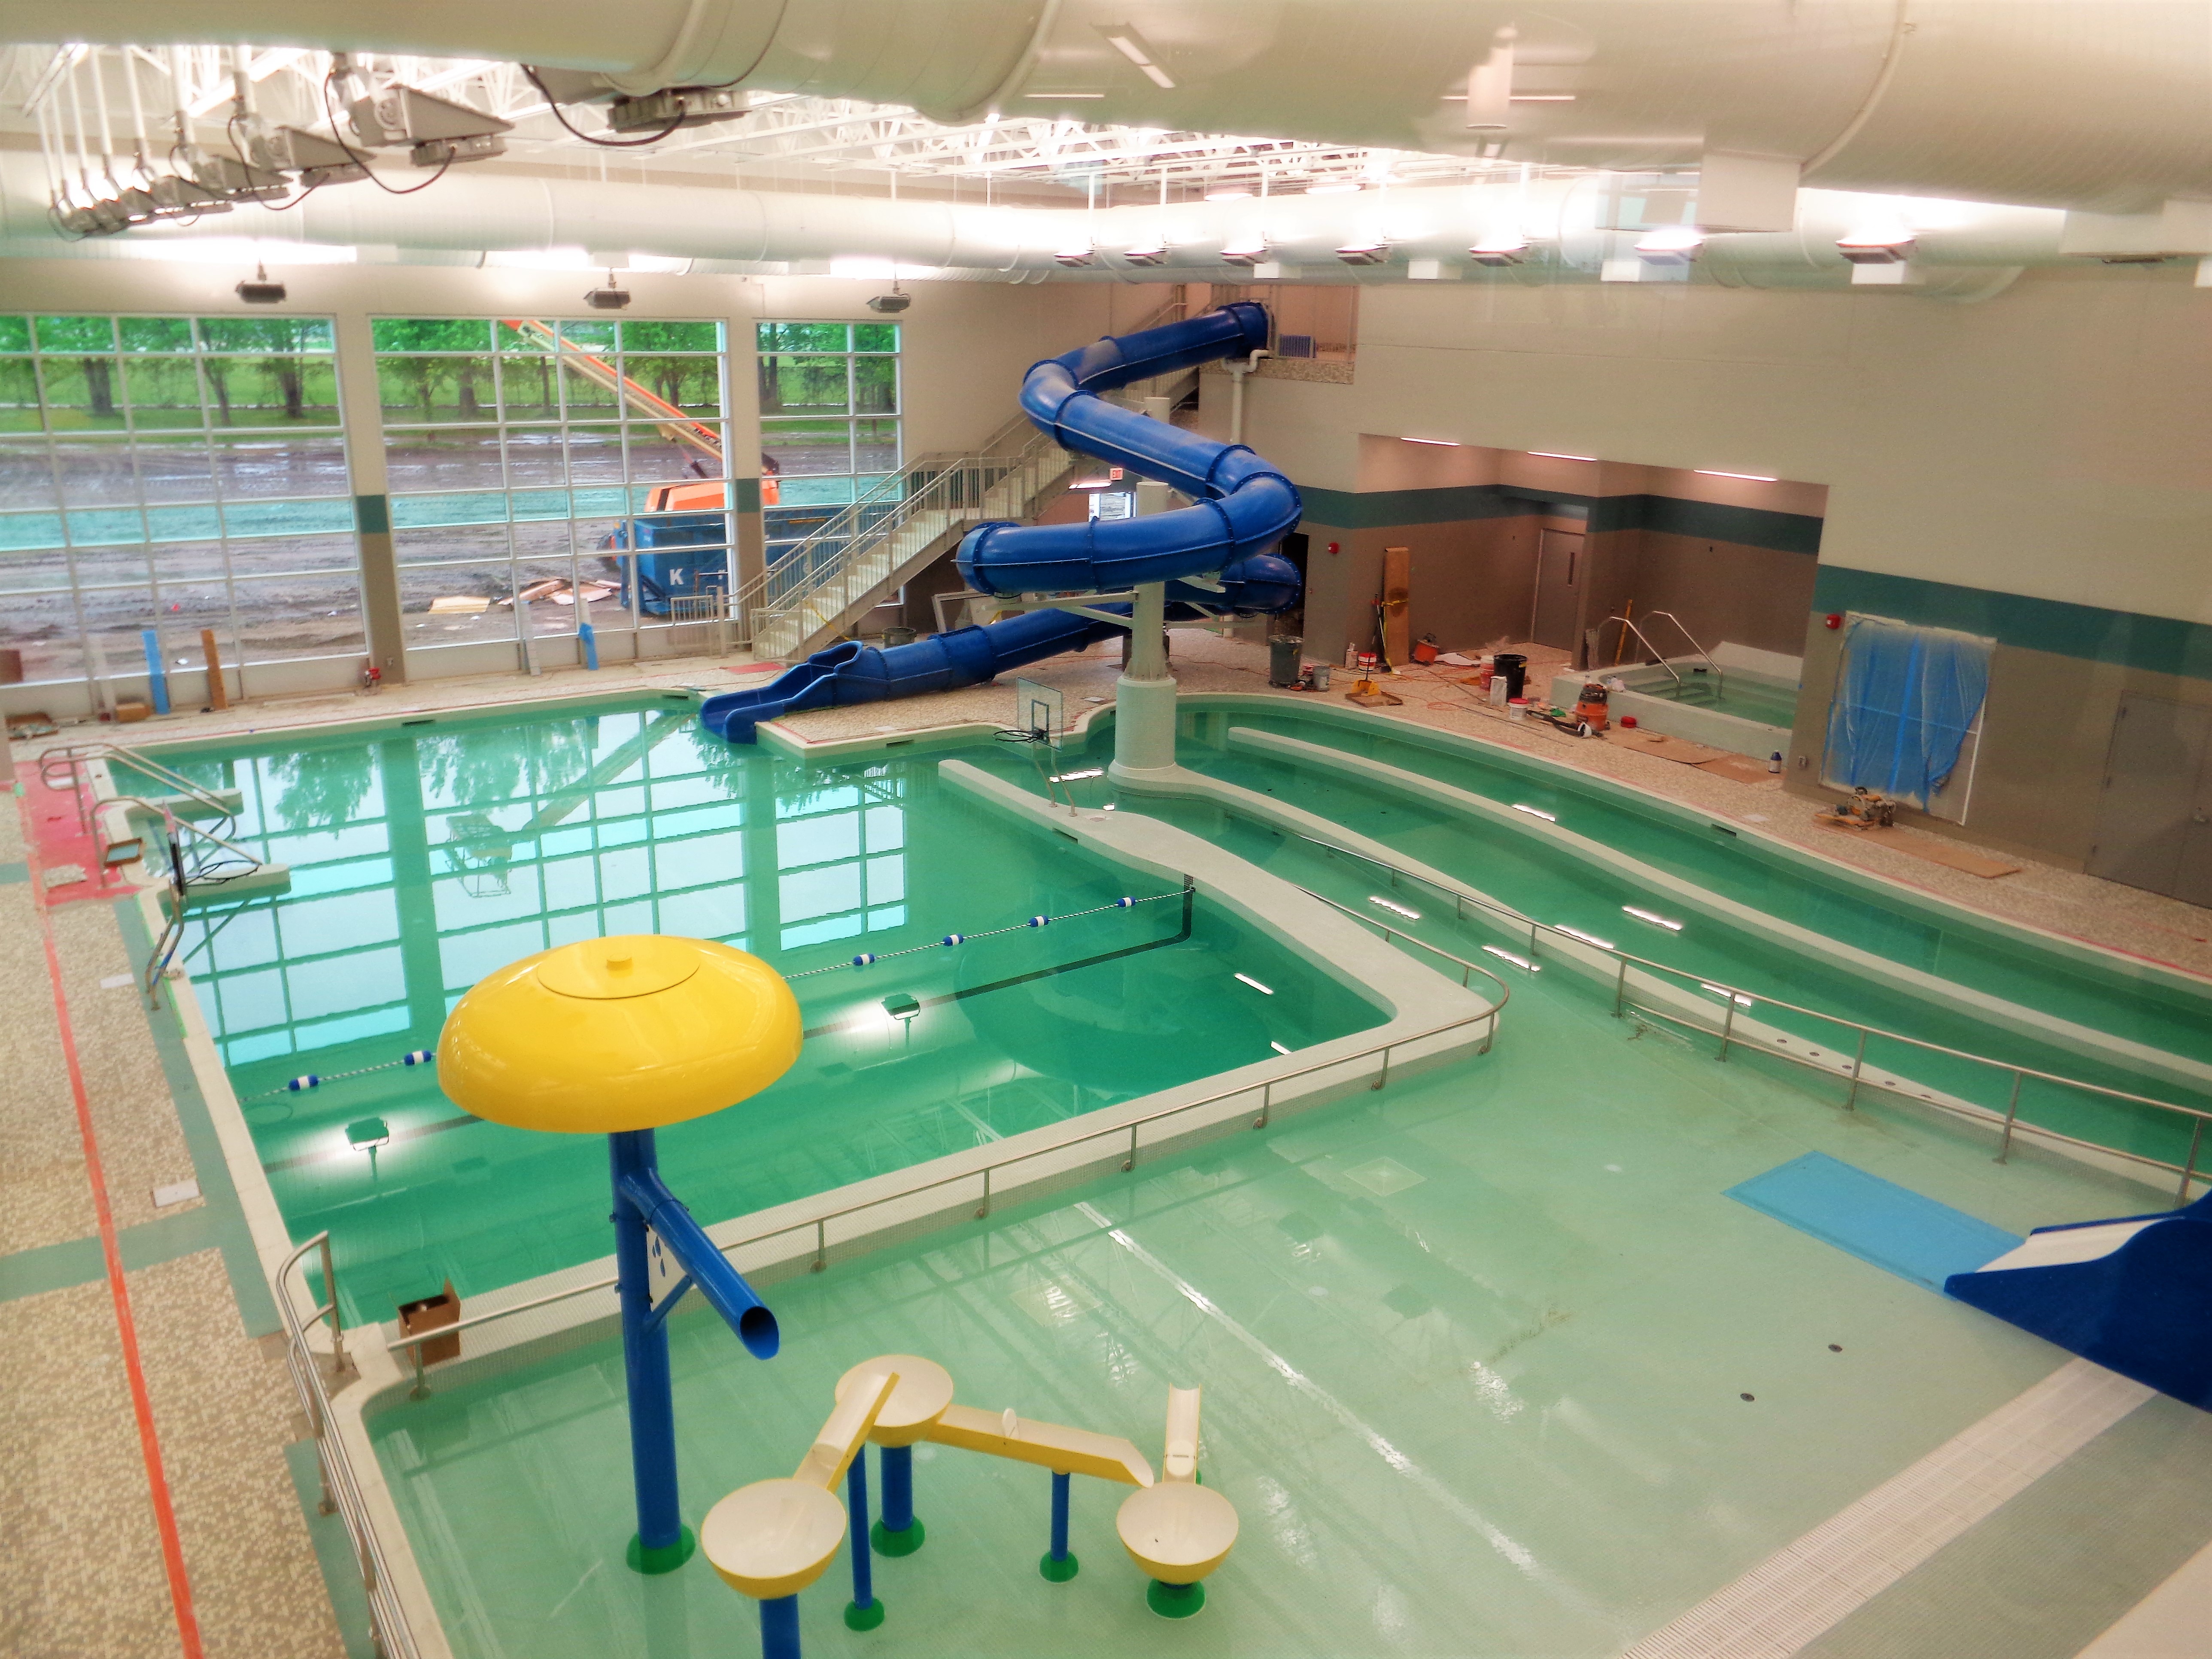 New YMCA hopes to bring health, fun together for families - The Newsleader